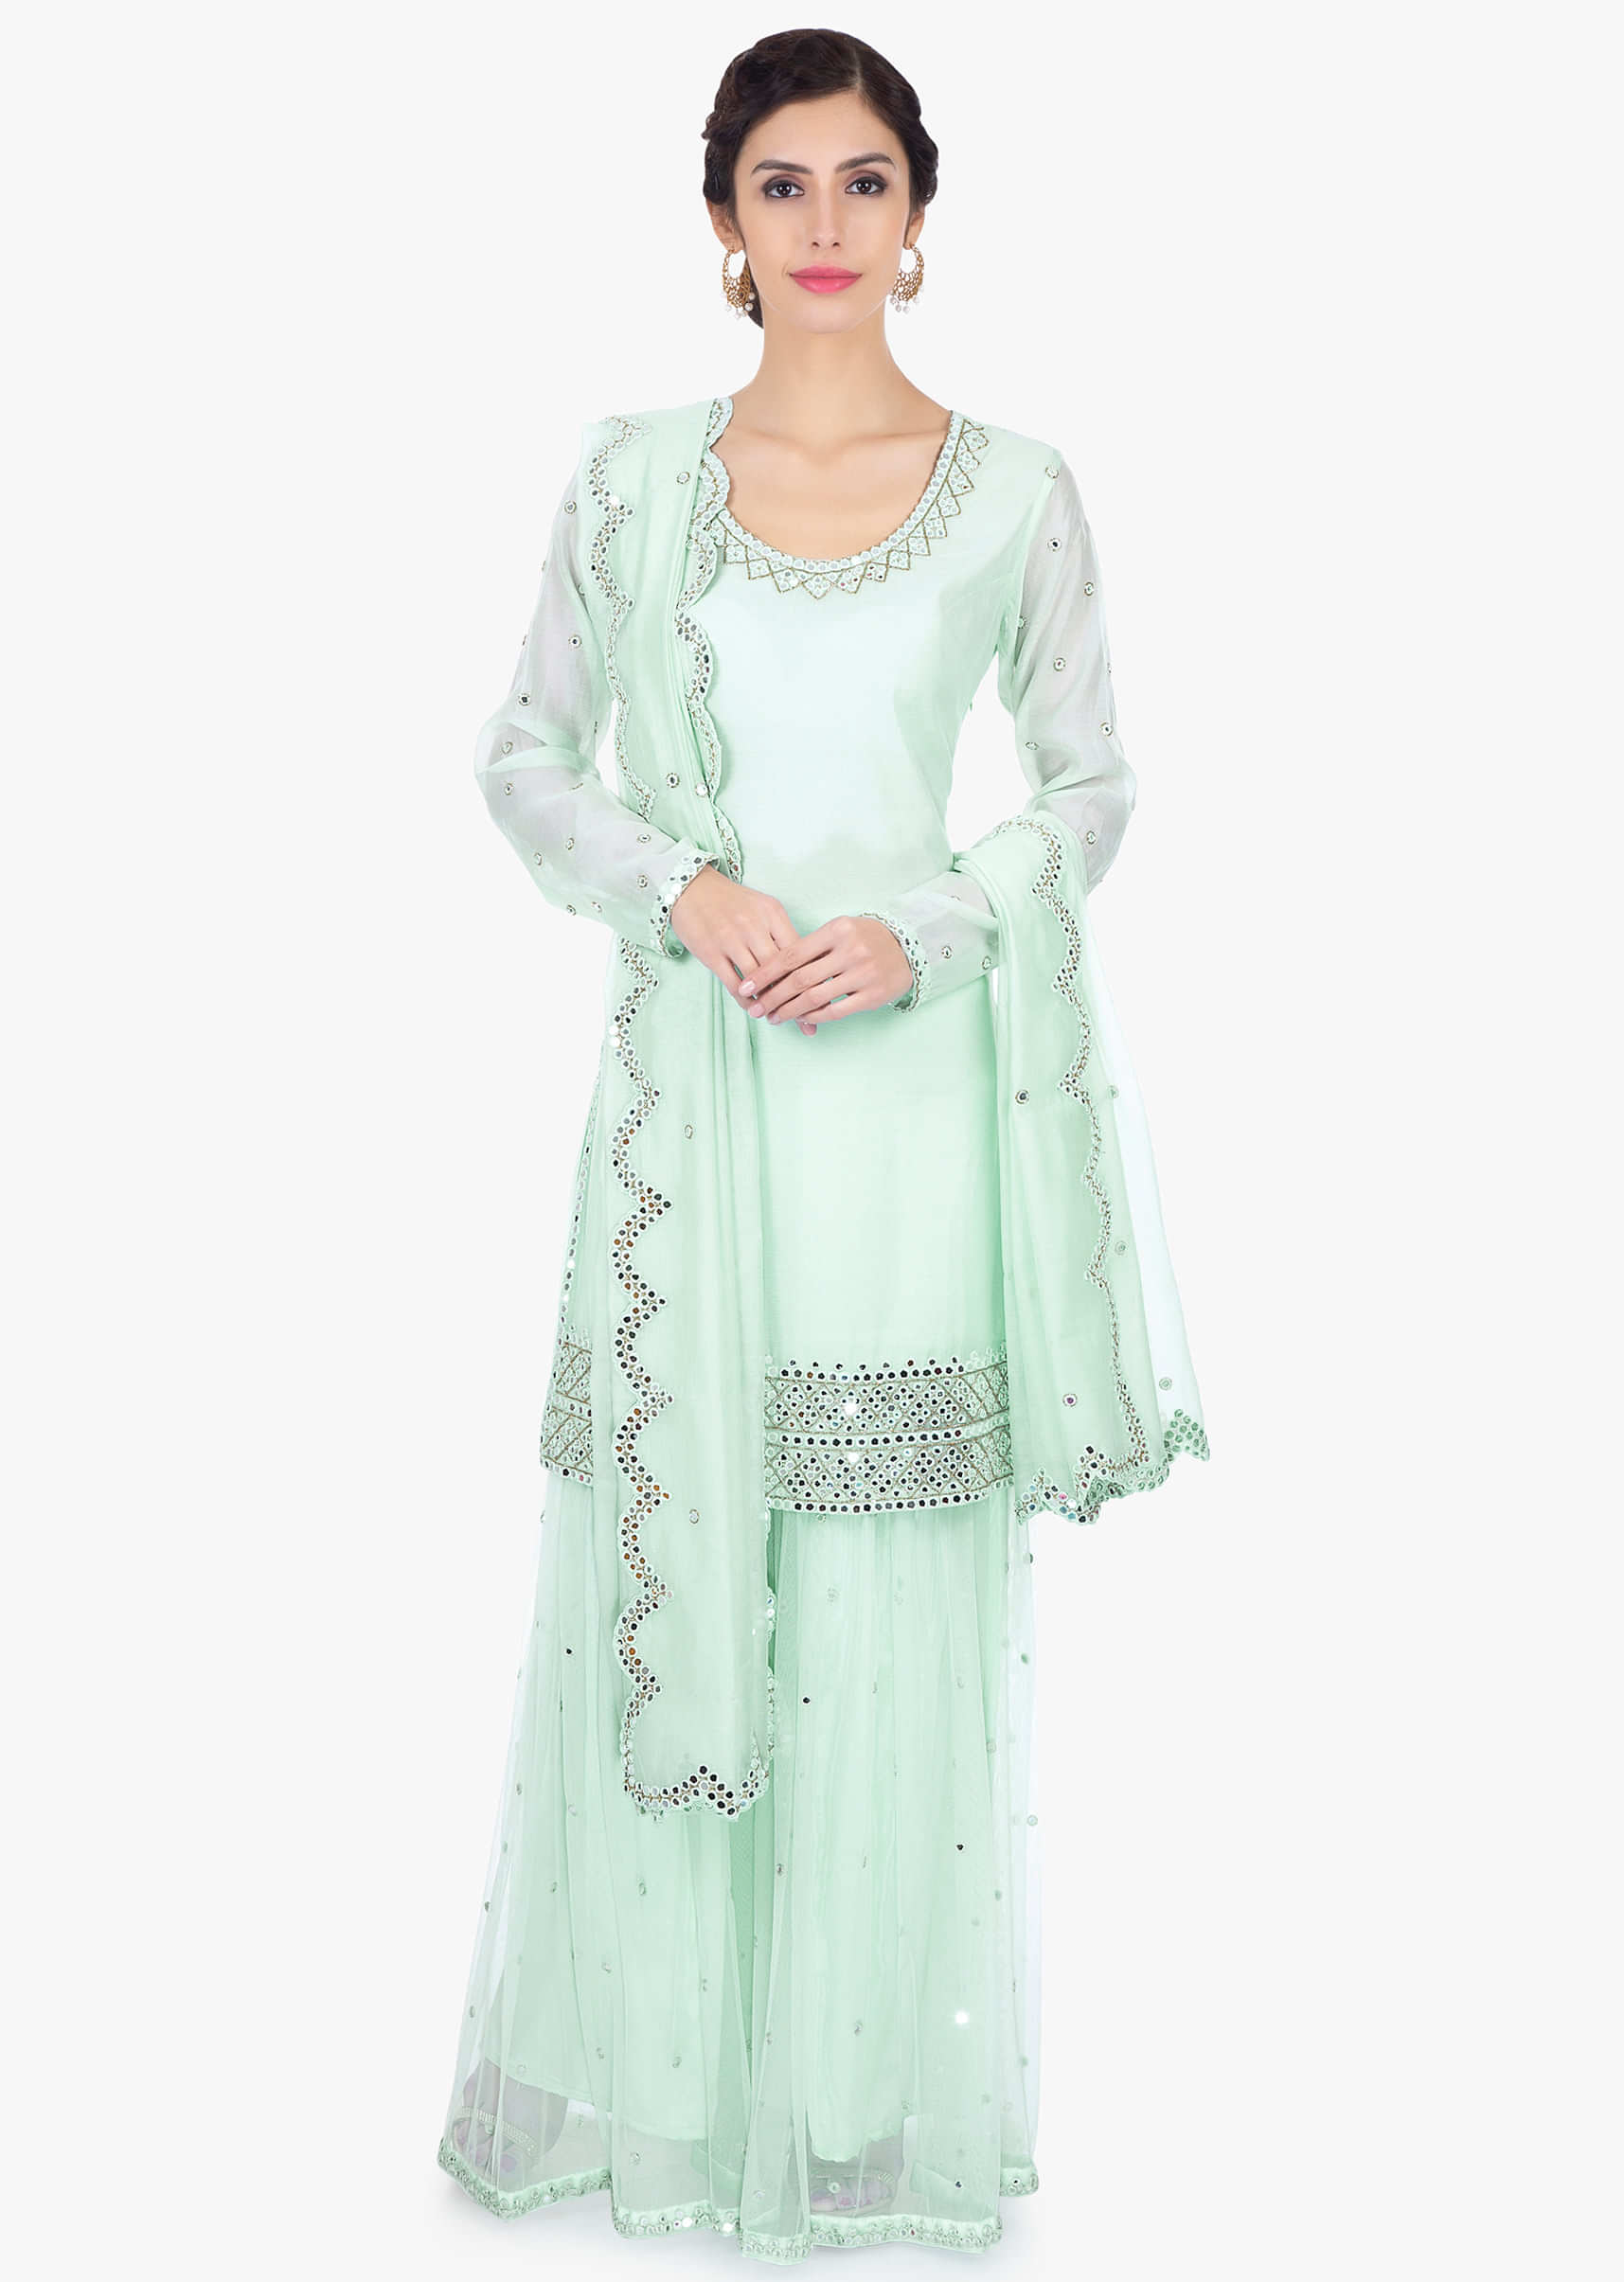 Mint green satin net sharara paired with a matching georgette suit